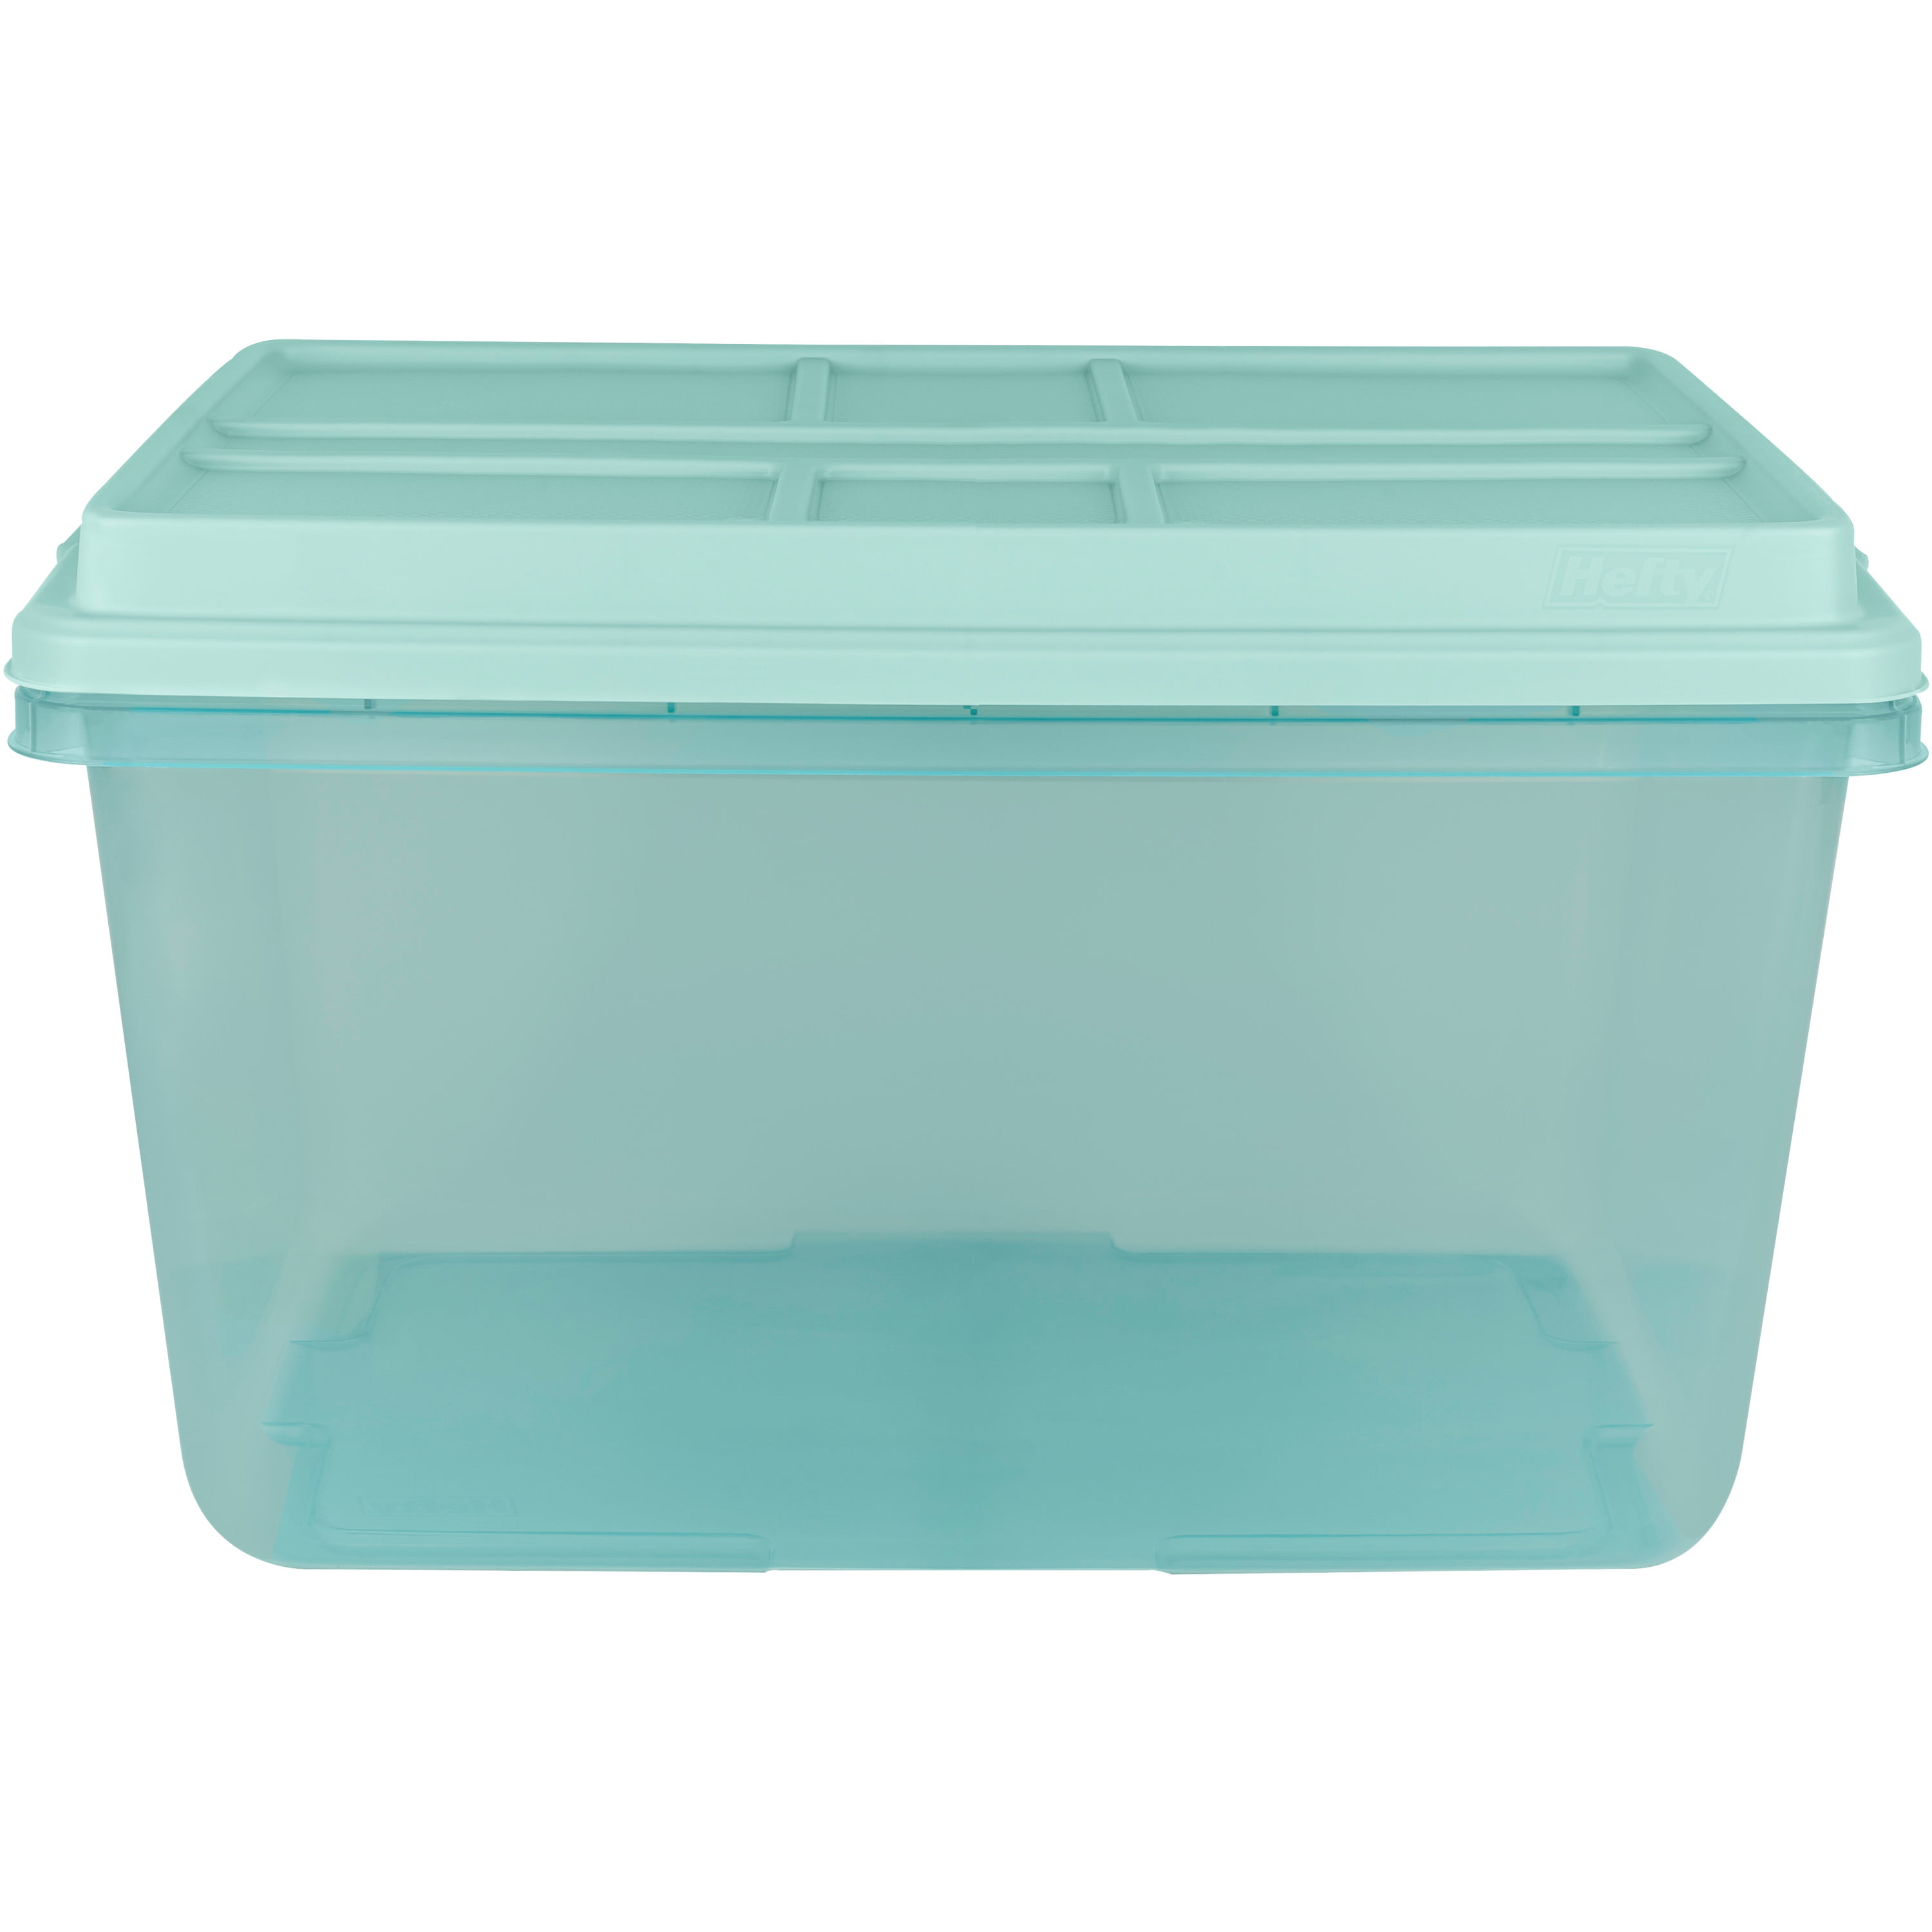 Hefty HI-RISE Clear Plastic Bin with Smoke Blue Lid (6 Pack) - 72 qt  Storage Container with Lid, Ideal Space Saver for Closet Shoe Storage Bins  and